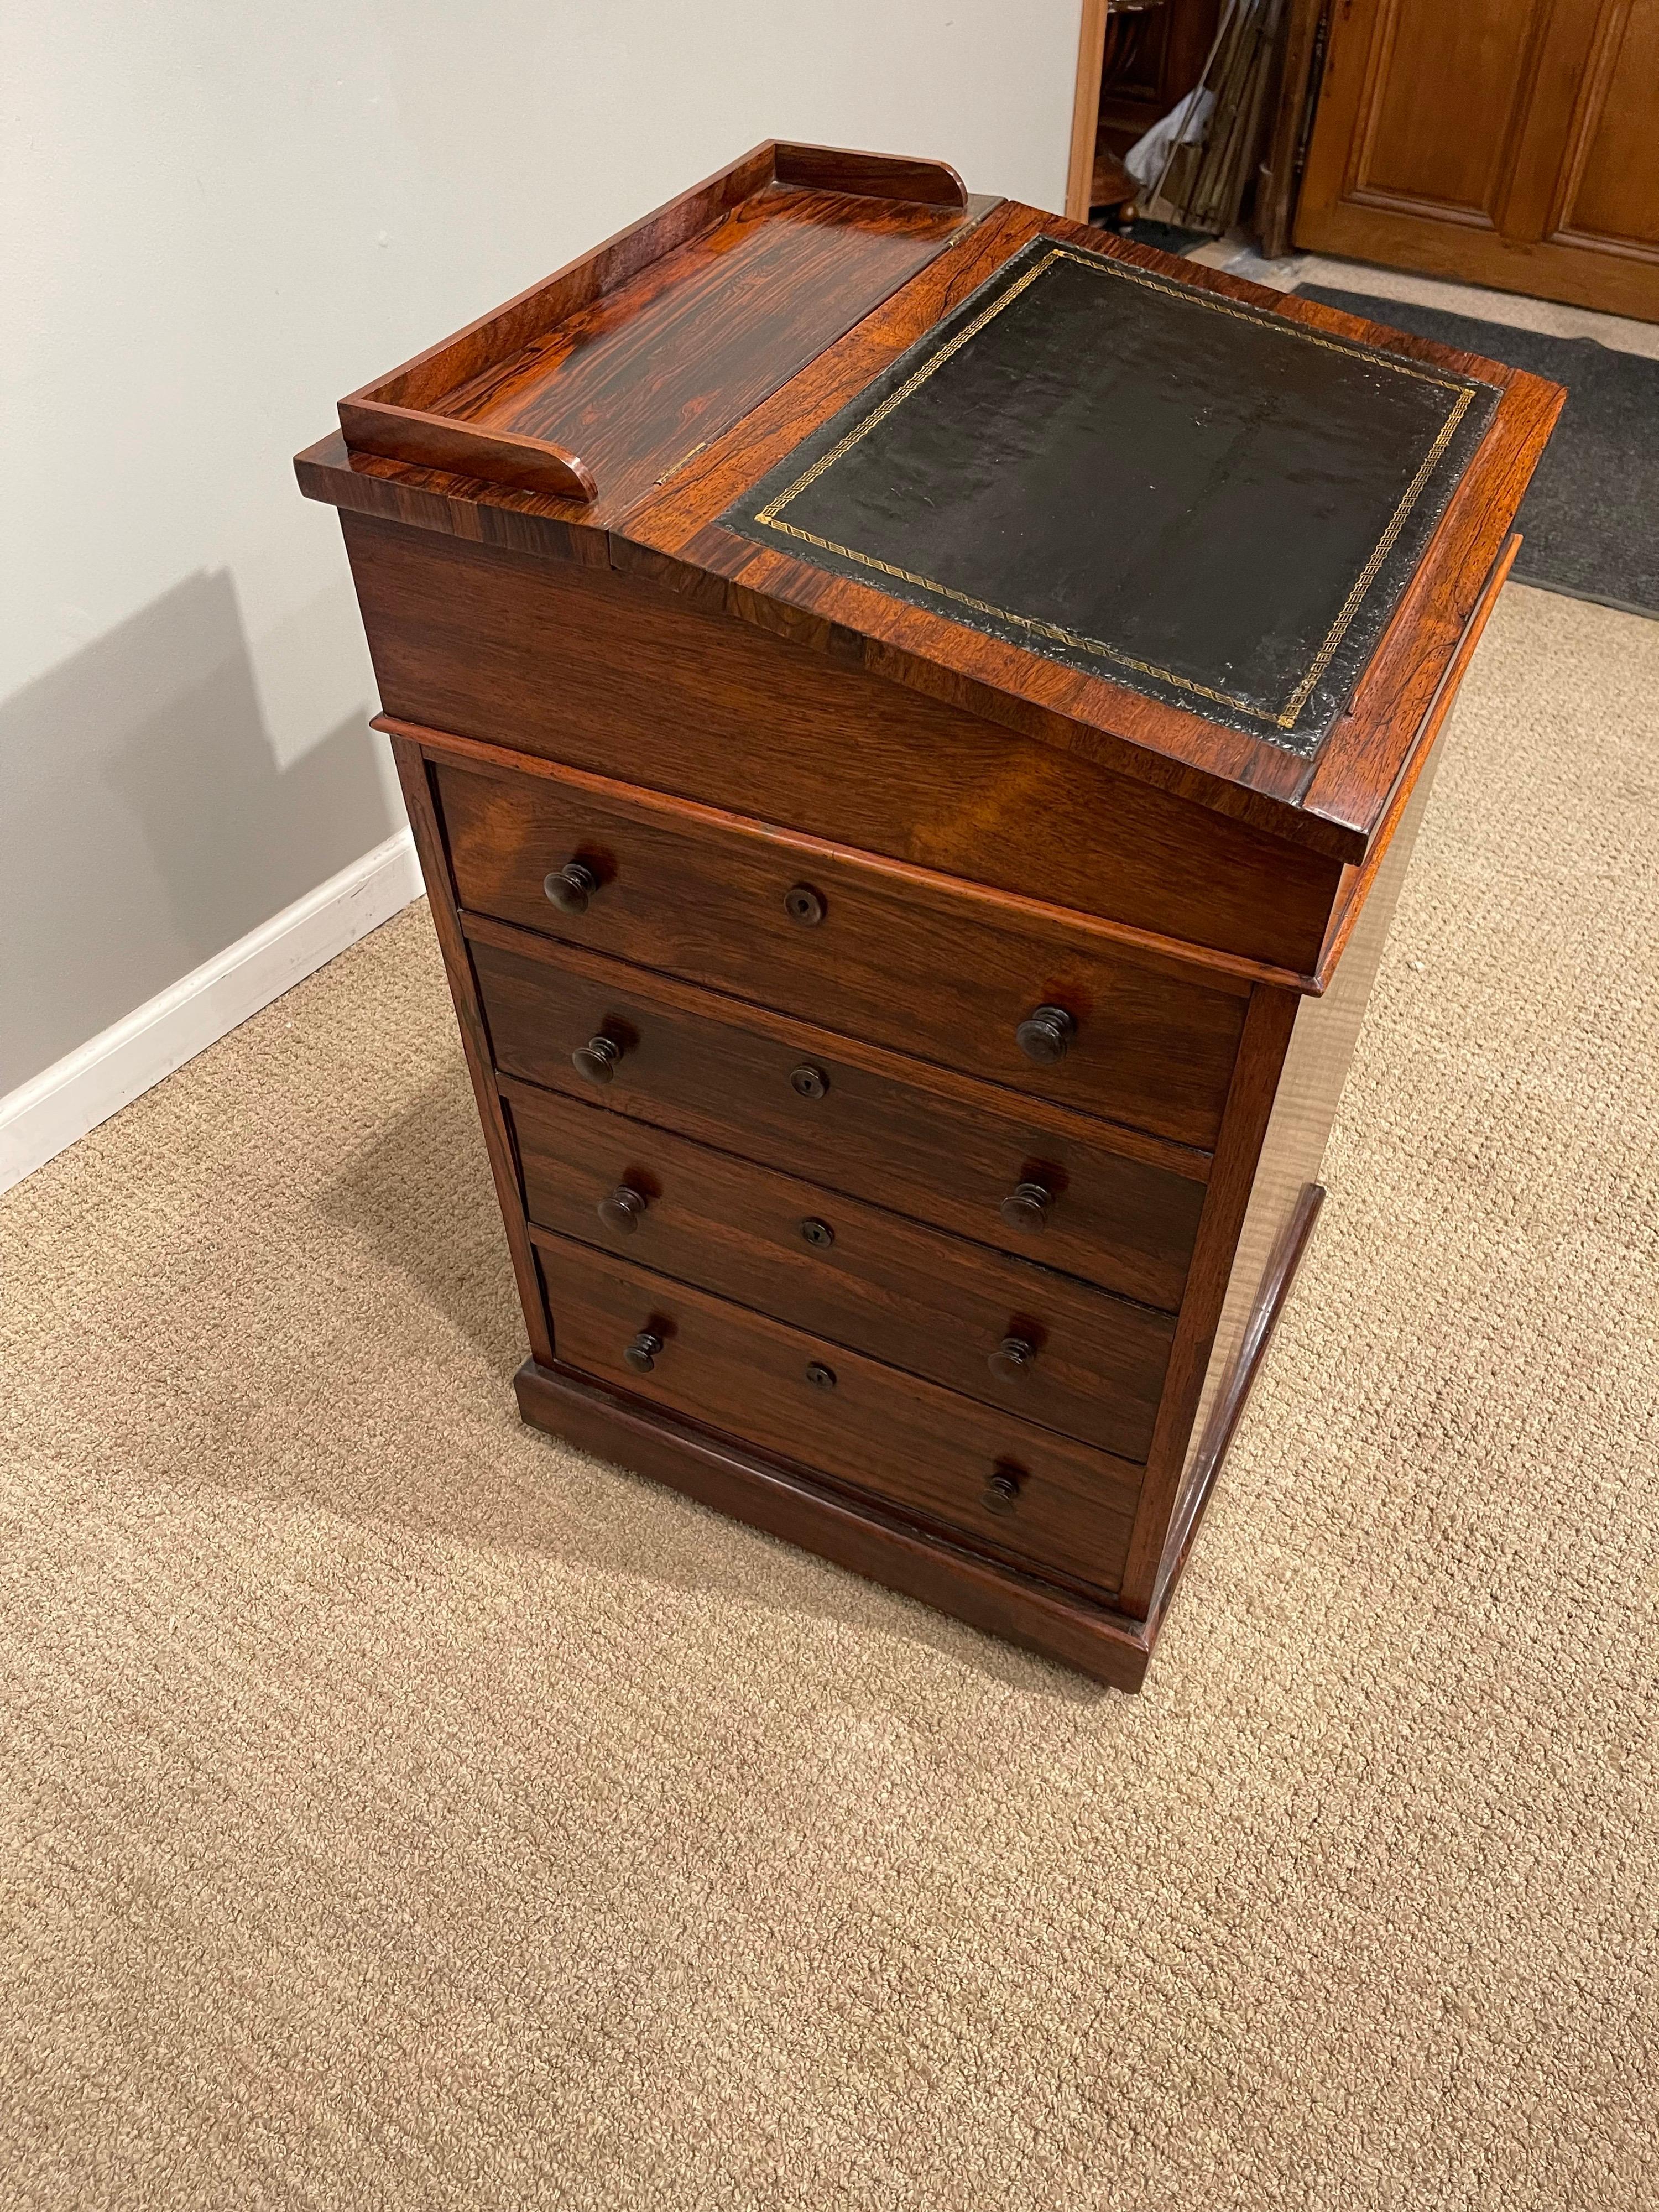 An early 19th century rosewood davenport desk, with low gallery above a lifting slant front
writing surface, with inset leather top & gold tooling. A small inkwell & pen holding & draw & pivoting drawer. It's interior having small drawers above 4